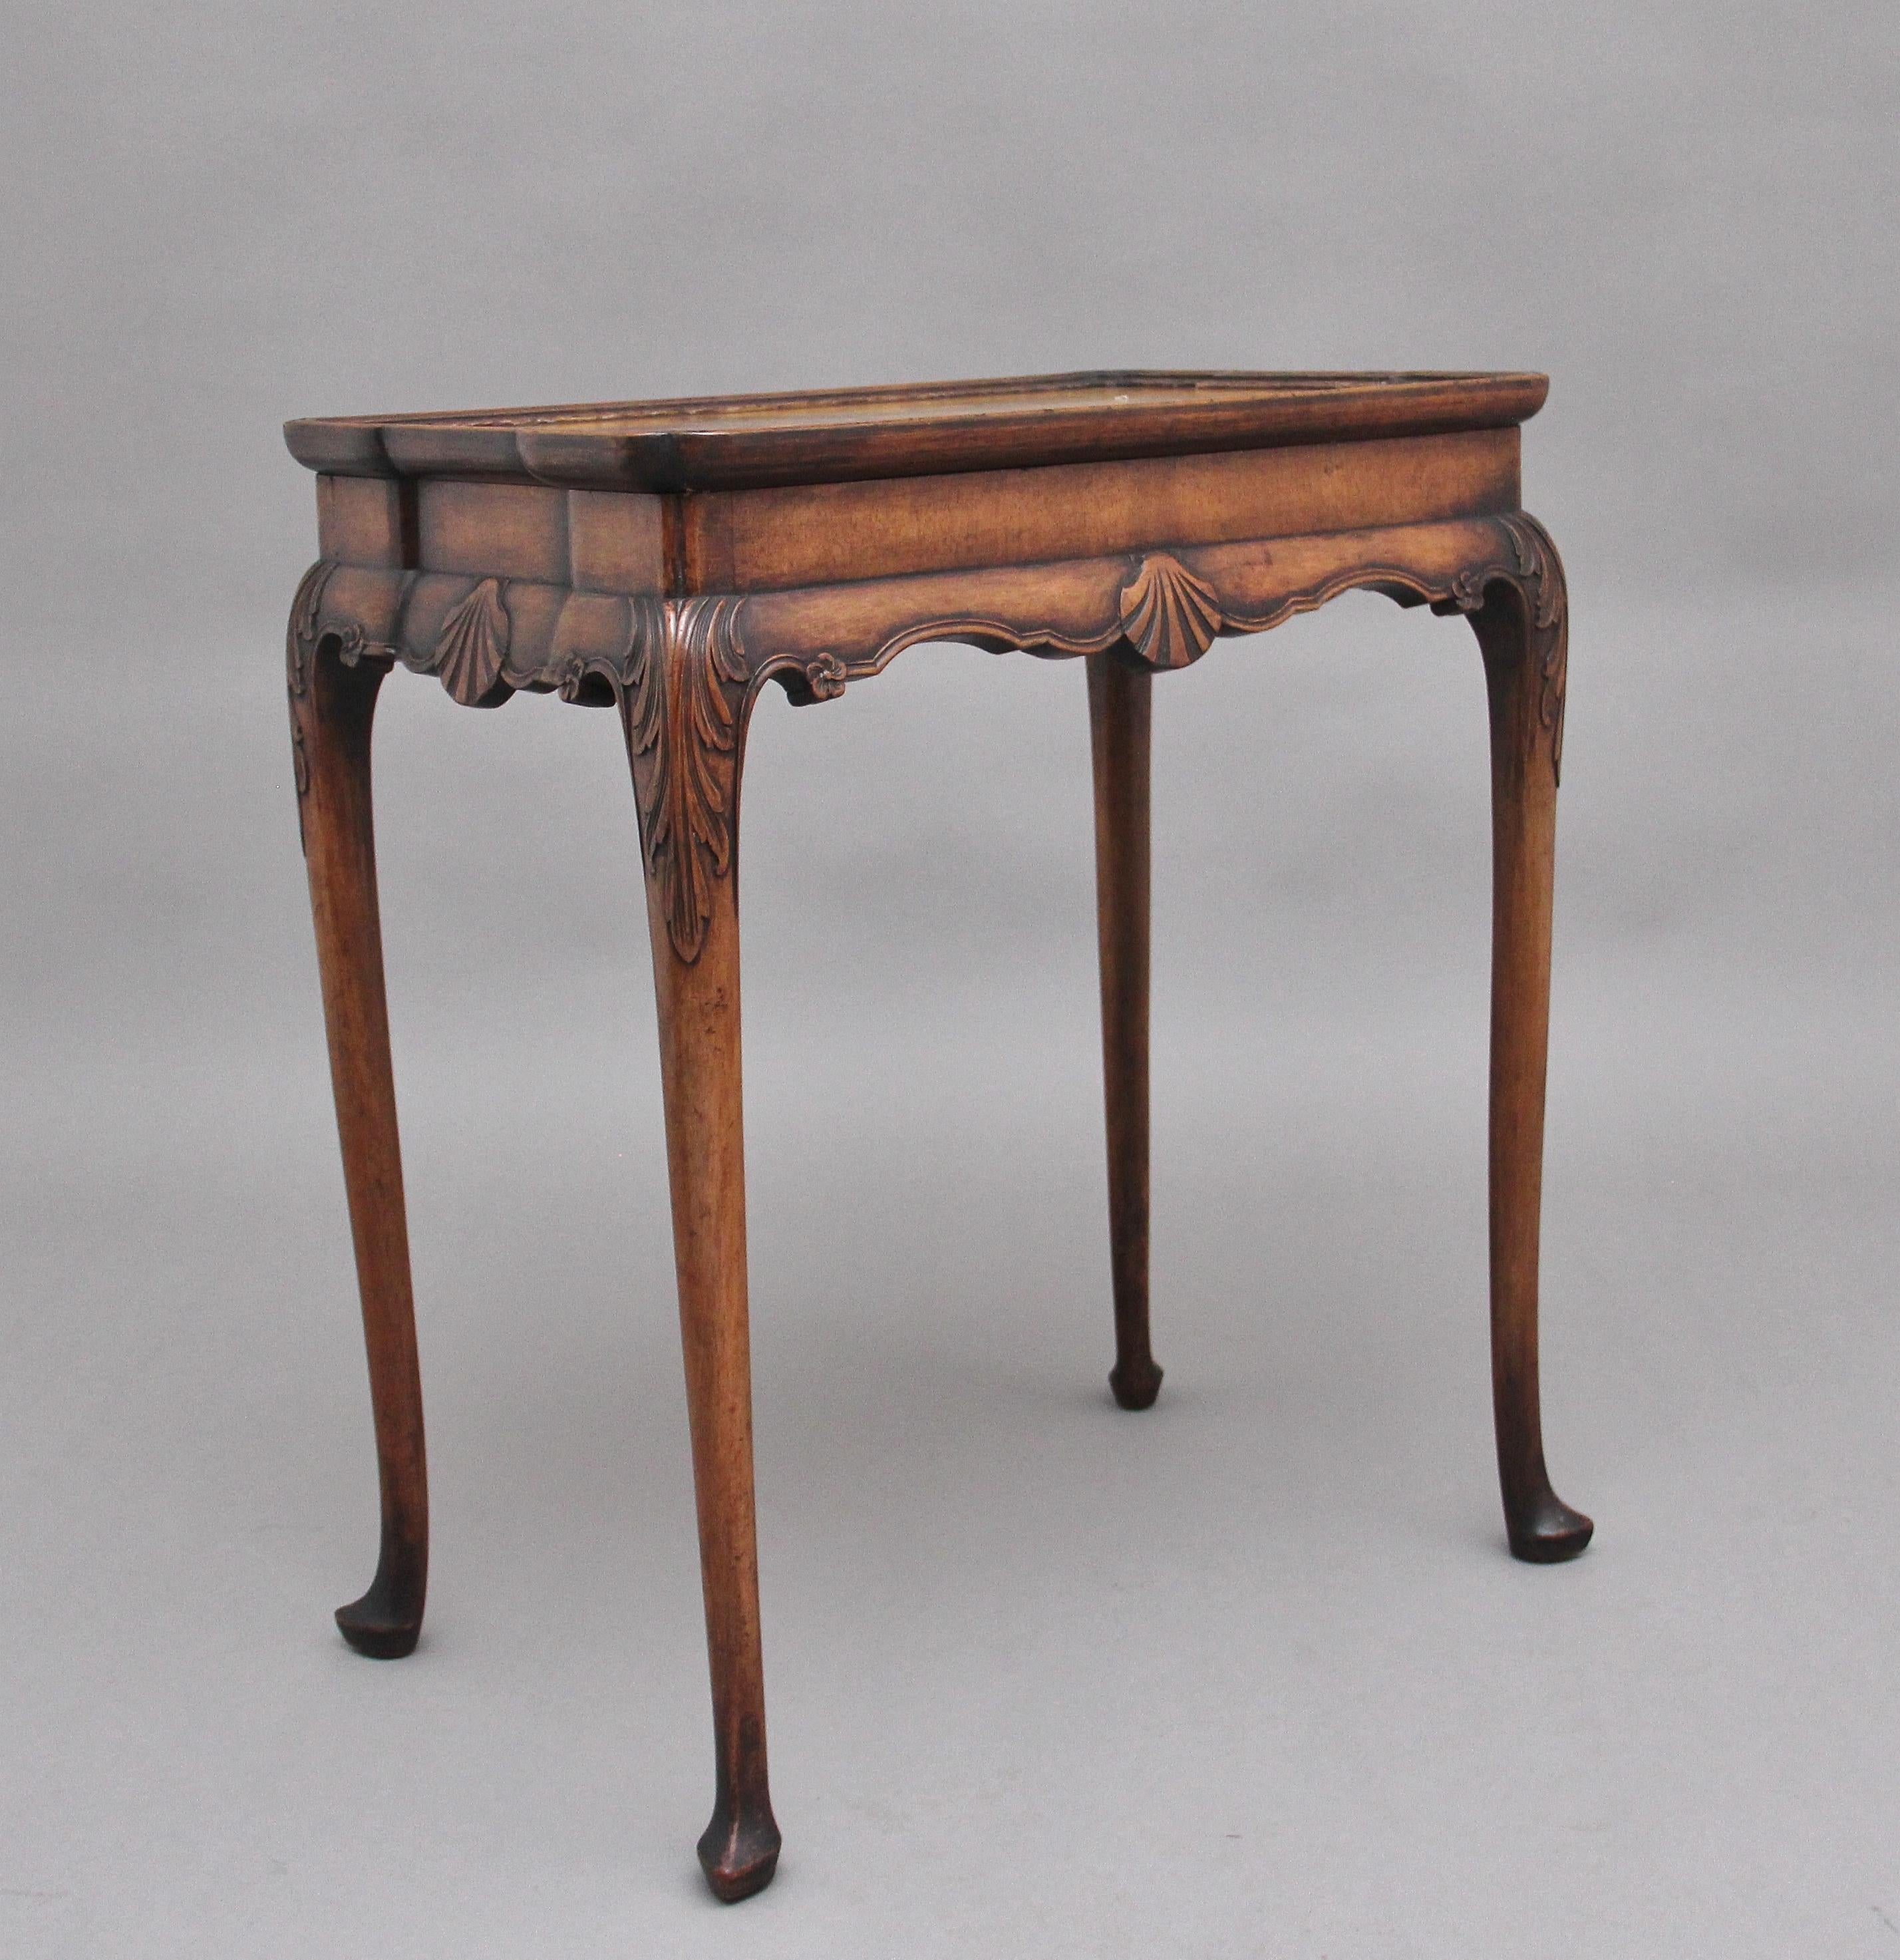 Early 20th century walnut Japanned polychrome decorated Georgian style silver / occasional table, the top with a decorative landscape scene raised on shell hip-carved club legs to pad feet. Circa 1920.